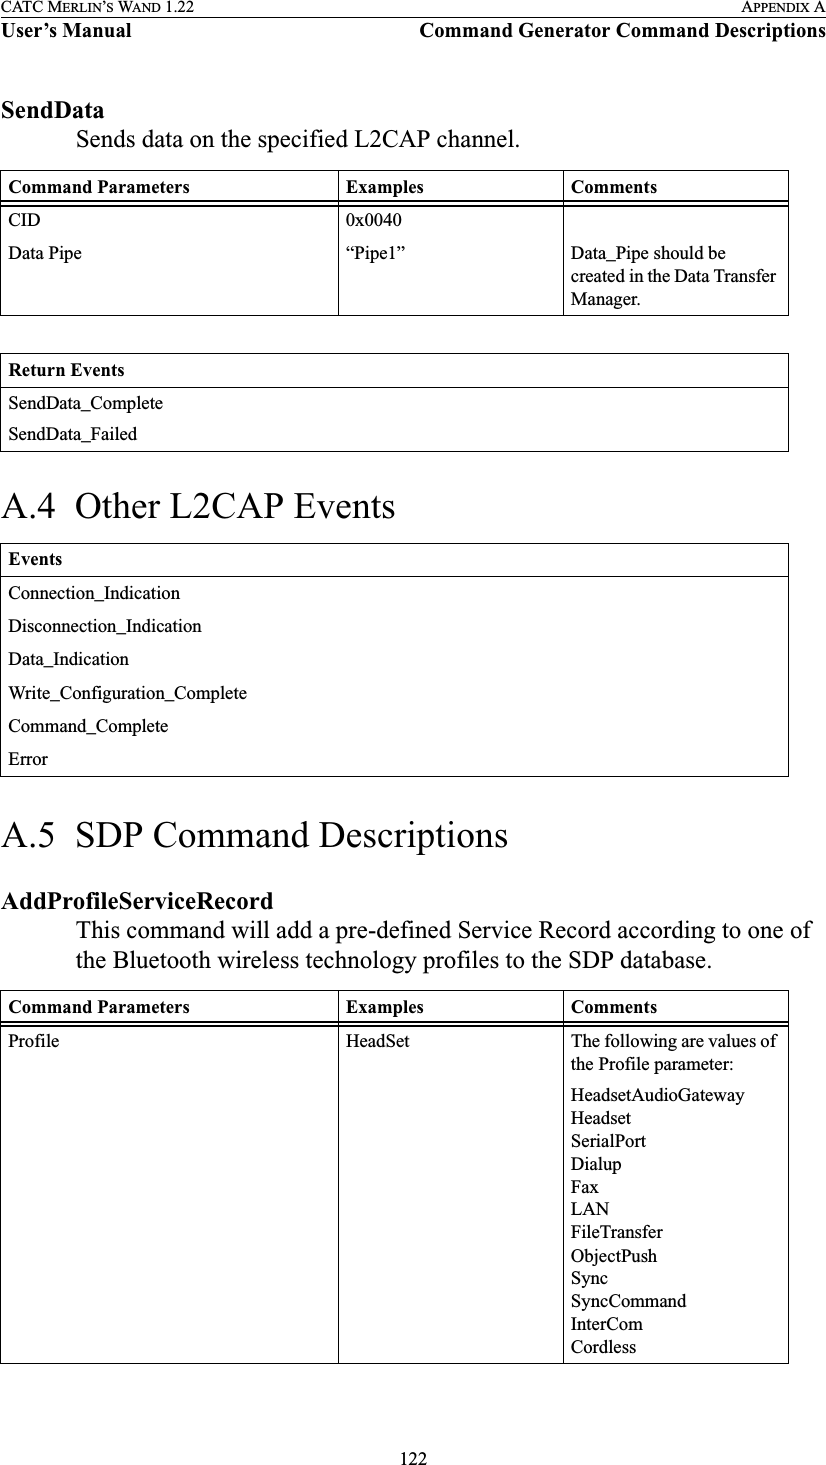 122CATC MERLIN’S WAND 1.22 APPENDIX AUser’s Manual Command Generator Command DescriptionsSendDataSends data on the specified L2CAP channel.A.4  Other L2CAP EventsA.5  SDP Command DescriptionsAddProfileServiceRecordThis command will add a pre-defined Service Record according to one of the Bluetooth wireless technology profiles to the SDP database.Command Parameters Examples CommentsCID 0x0040Data Pipe “Pipe1” Data_Pipe should be created in the Data Transfer Manager.Return EventsSendData_CompleteSendData_FailedEventsConnection_IndicationDisconnection_IndicationData_IndicationWrite_Configuration_CompleteCommand_CompleteErrorCommand Parameters Examples CommentsProfile HeadSet The following are values of the Profile parameter:HeadsetAudioGatewayHeadsetSerialPortDialupFaxLANFileTransferObjectPushSyncSyncCommandInterComCordless